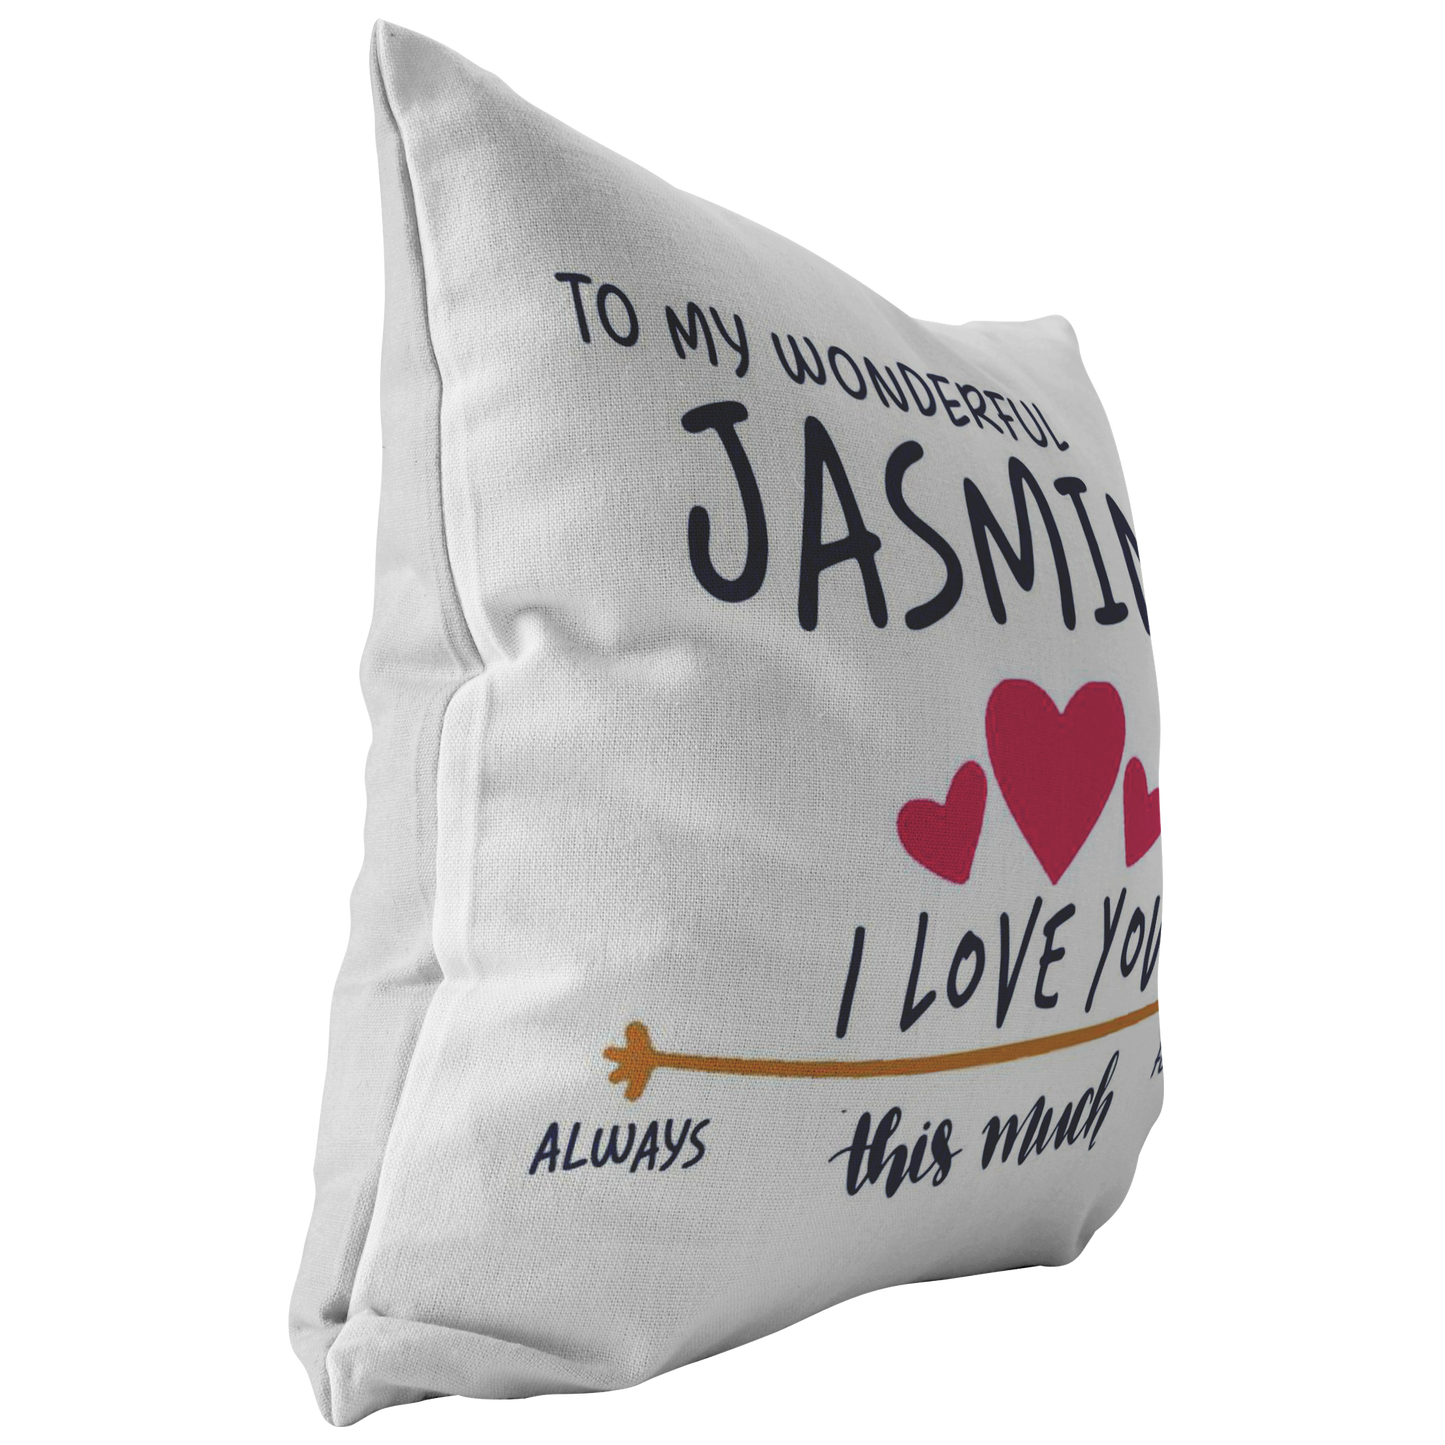 PL-21251000-sp-39728 - [ Jasmine | 1 | 1 ] (PI_ThrowPillowCovers) Valentines Day Pillow Covers 18x18 - to My Wonderful Jasmine